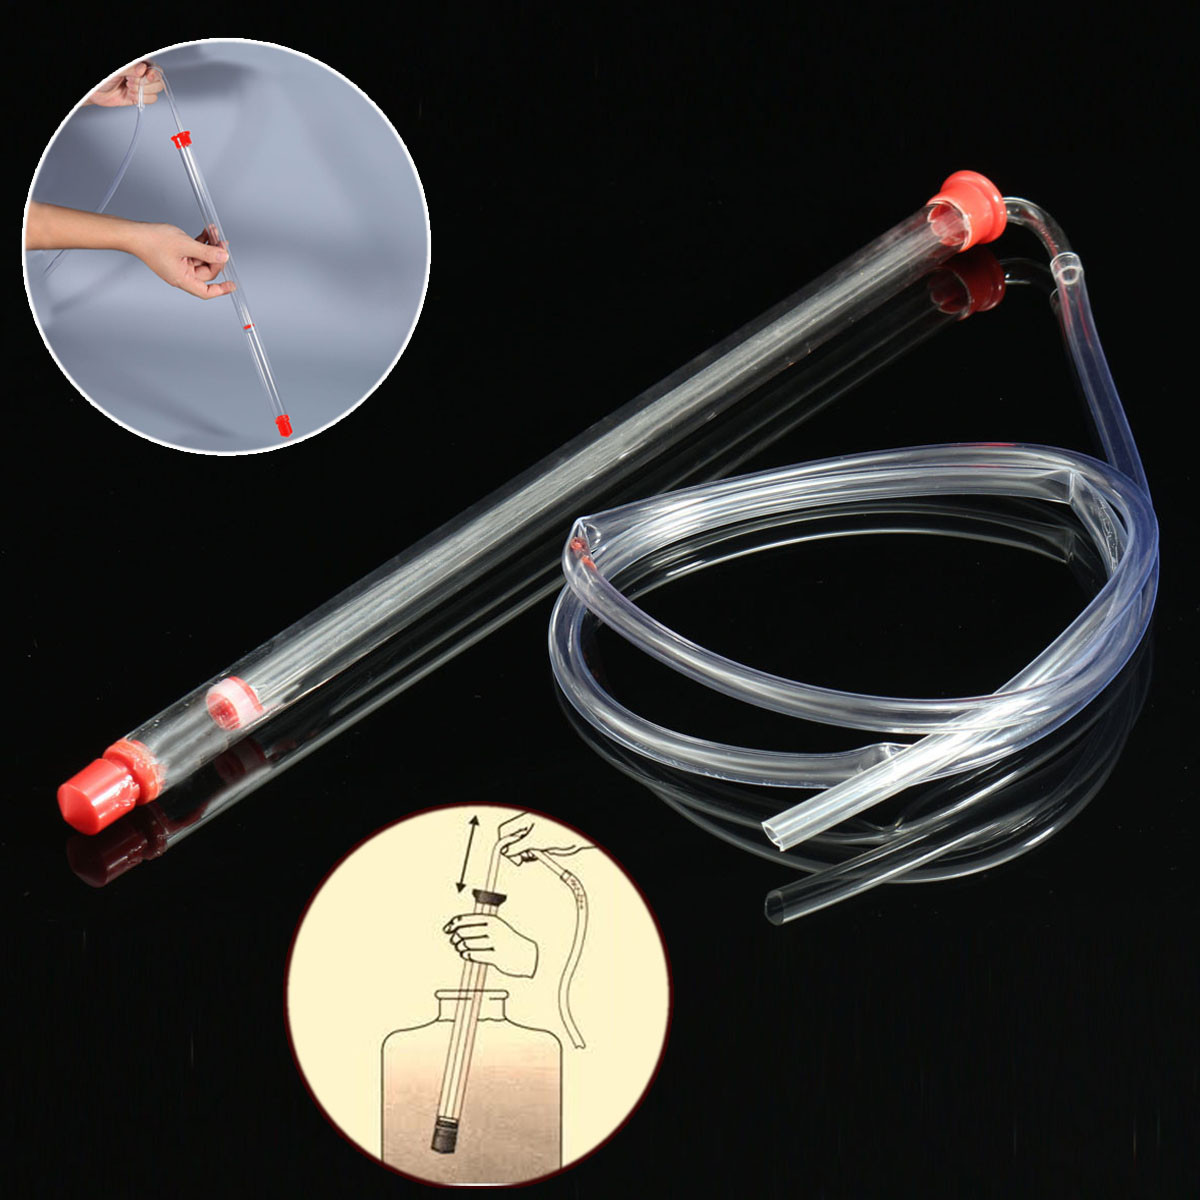 

Auto Syphon Tube Pump Filter Plastic Tubing For Beer Wine Home Brewing Tool